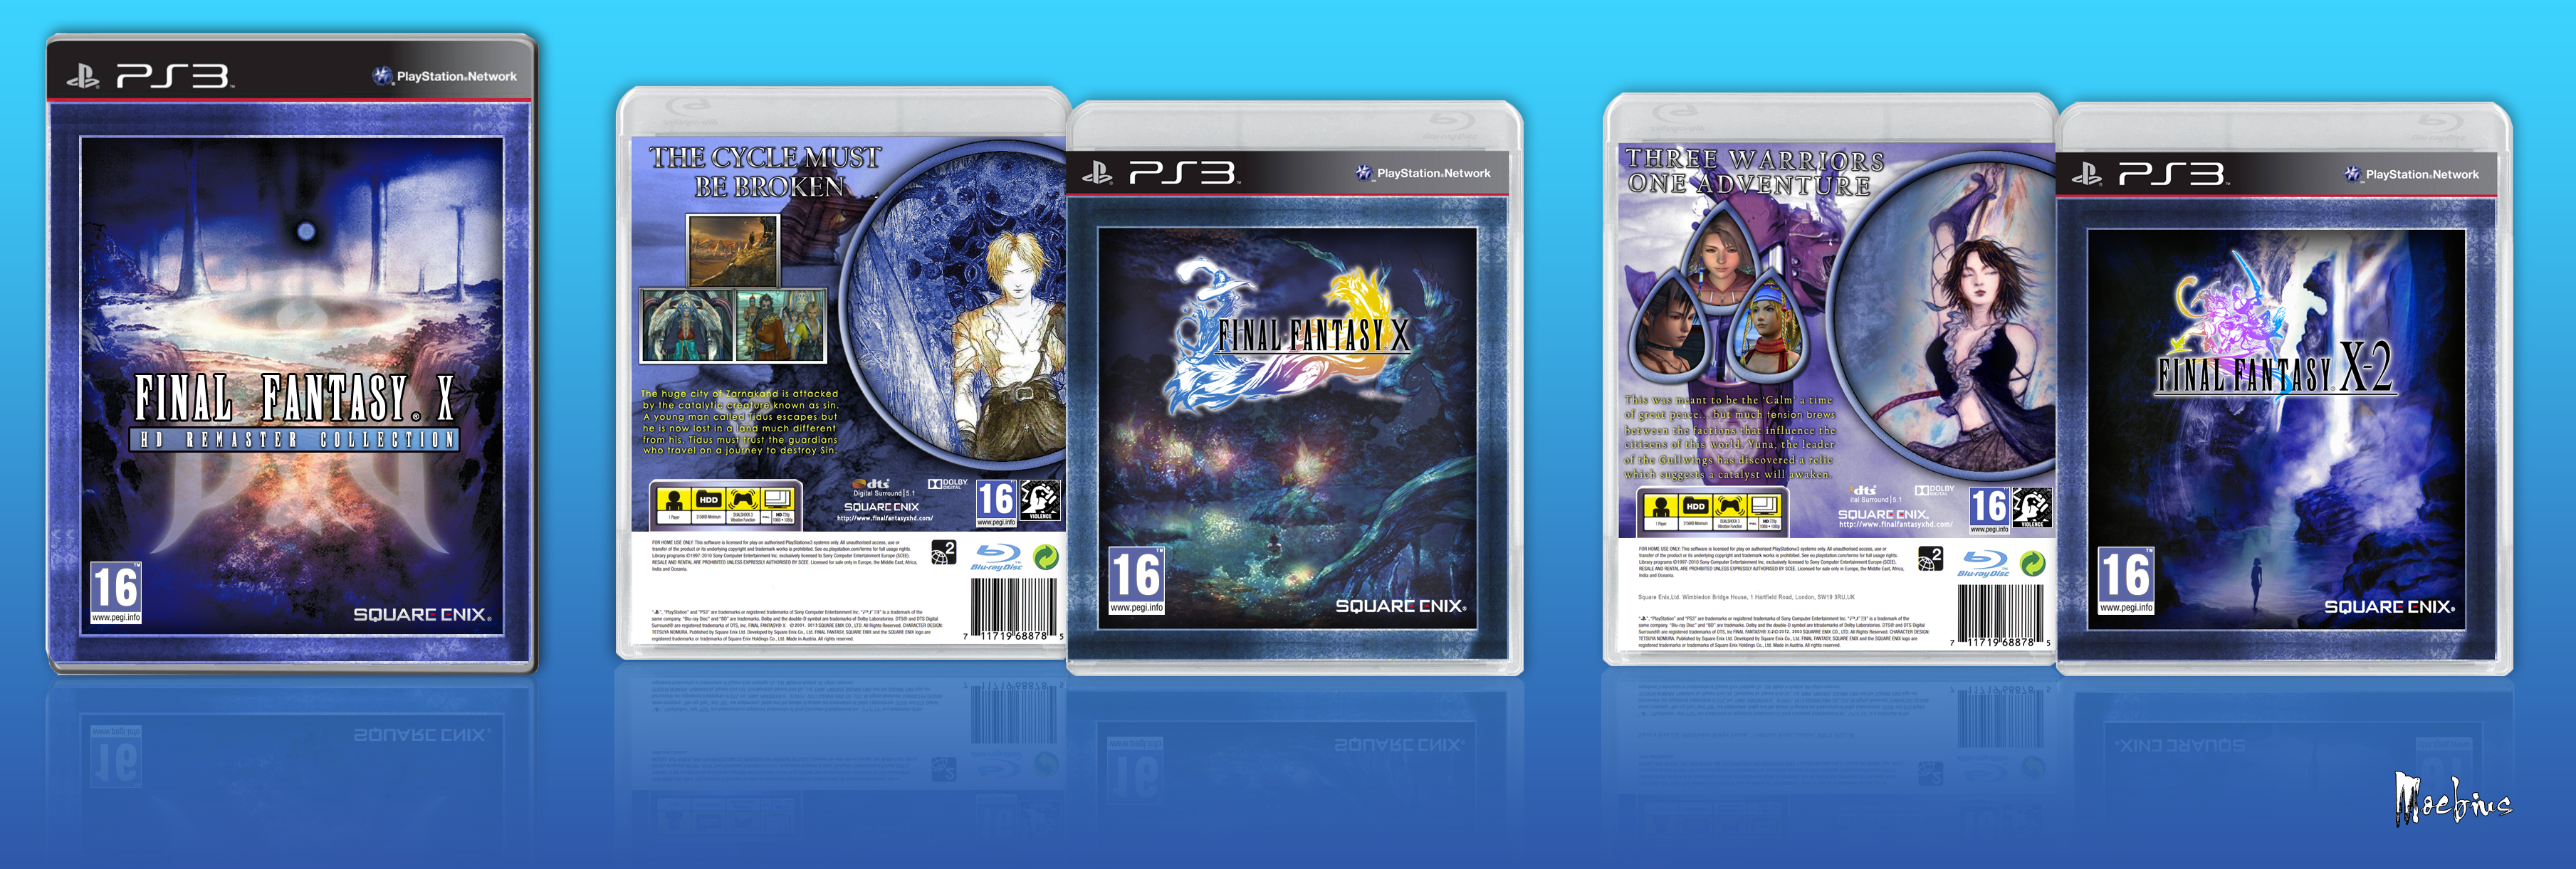 Final Fantasy X HD Remaster Collection box cover